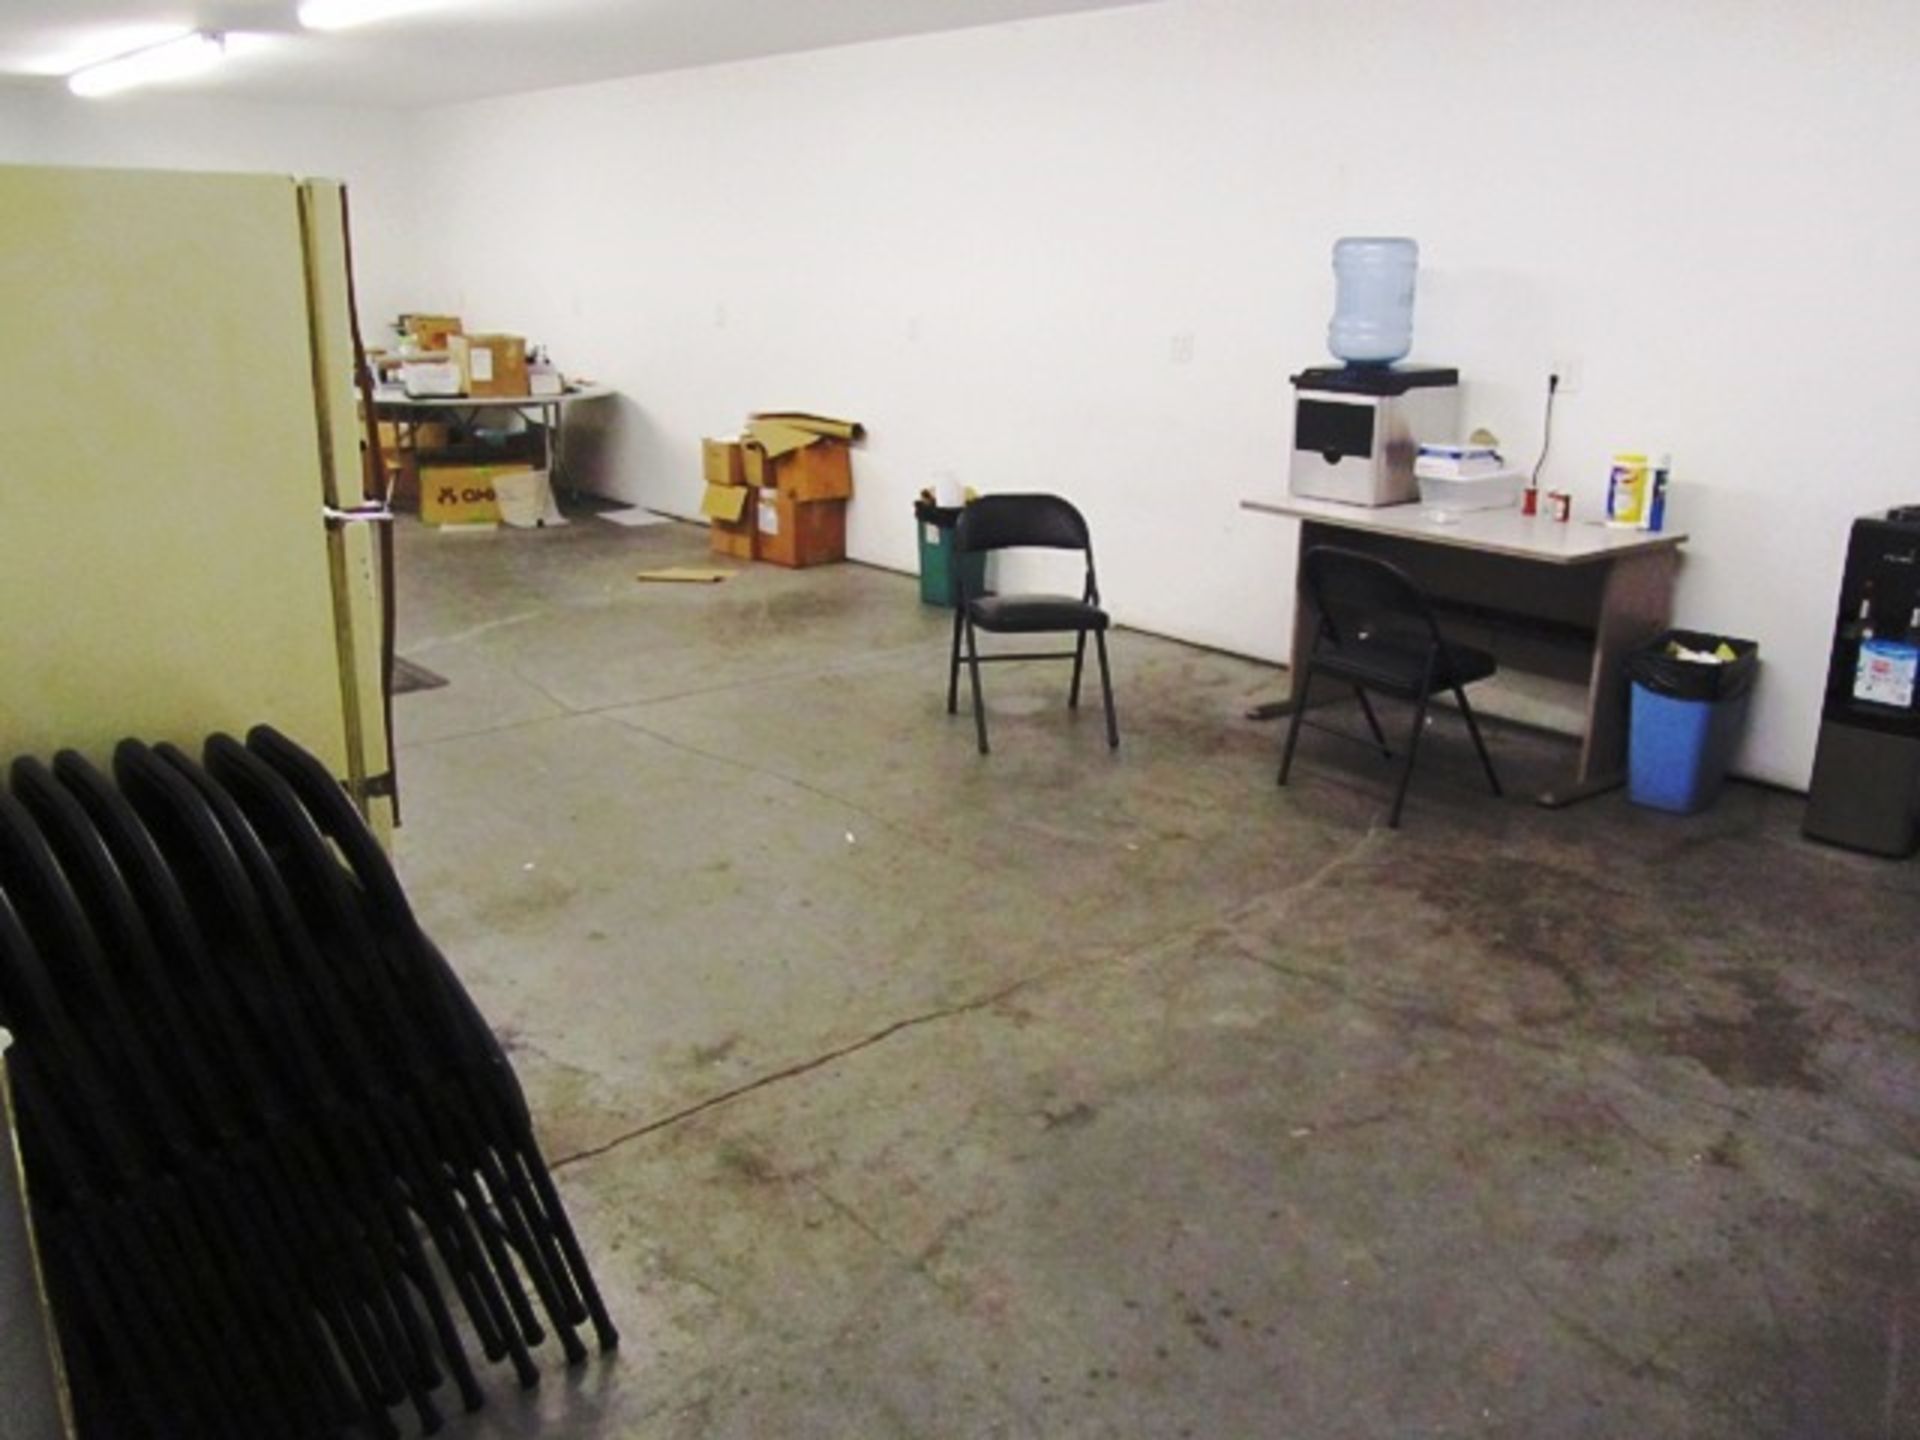 Contents of Breakroom (as described at time of auction)